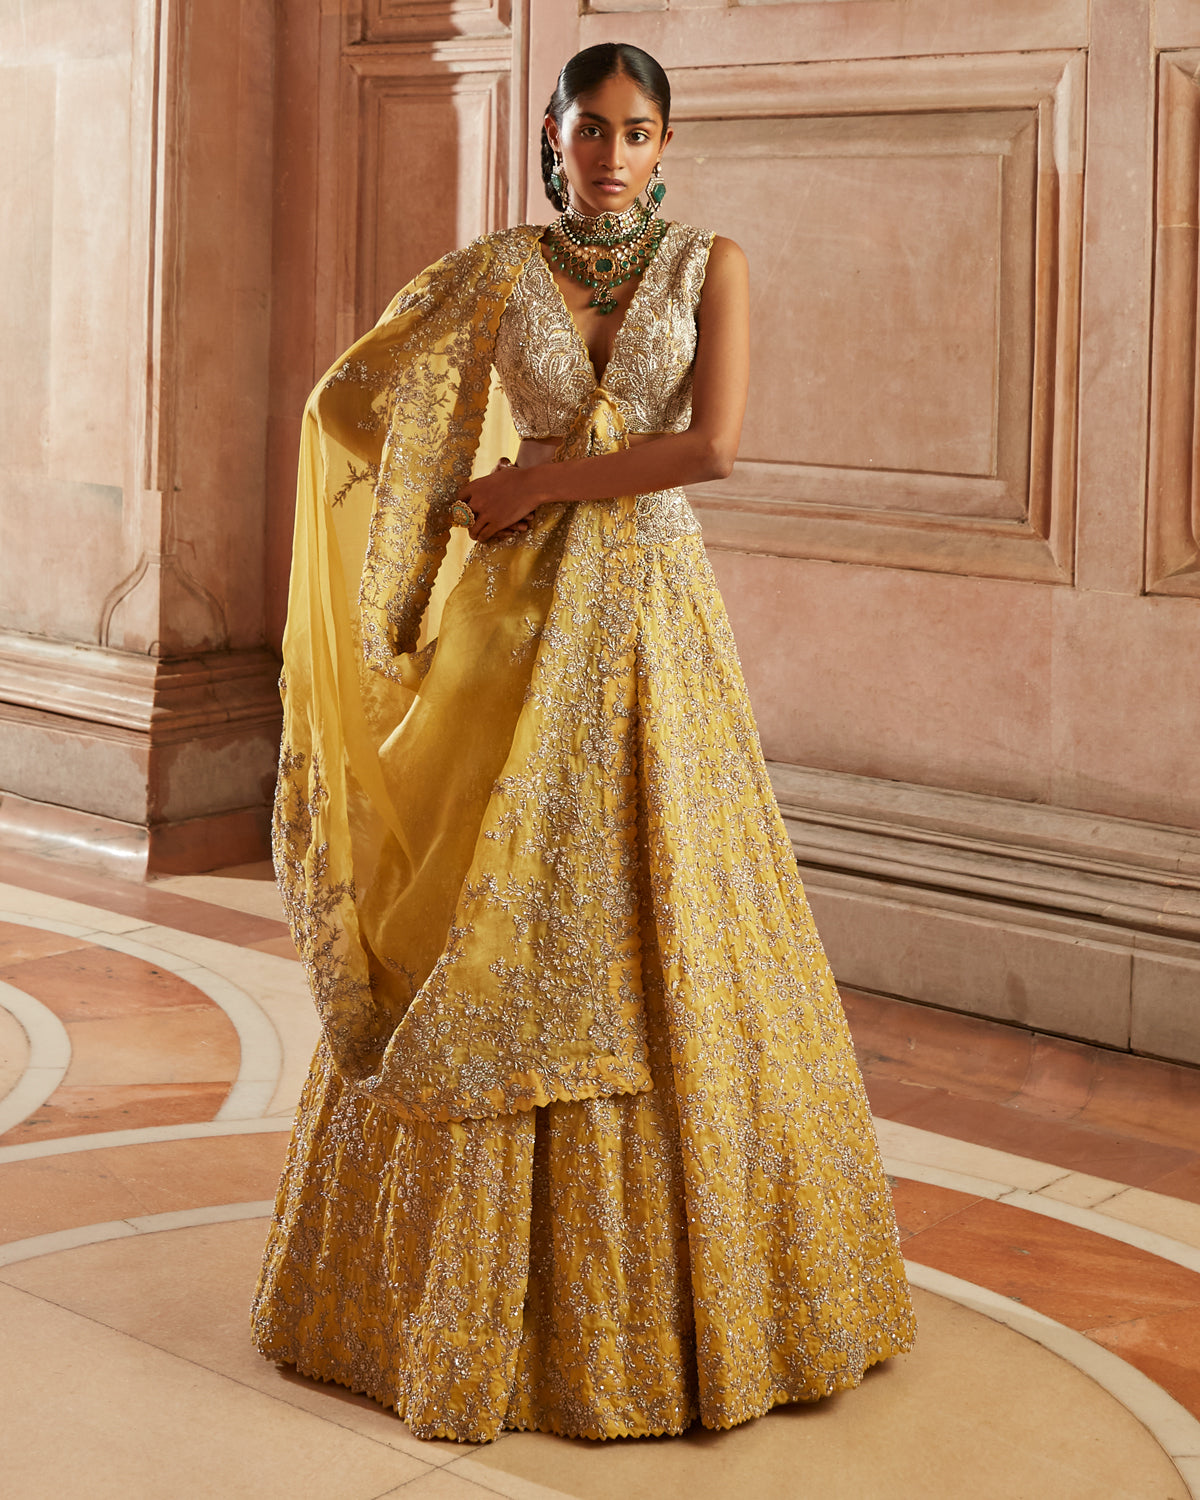 Our Favourite Sabyasachi Lehengas For Wedding Season Will Leave You In Awe  | Femina.in